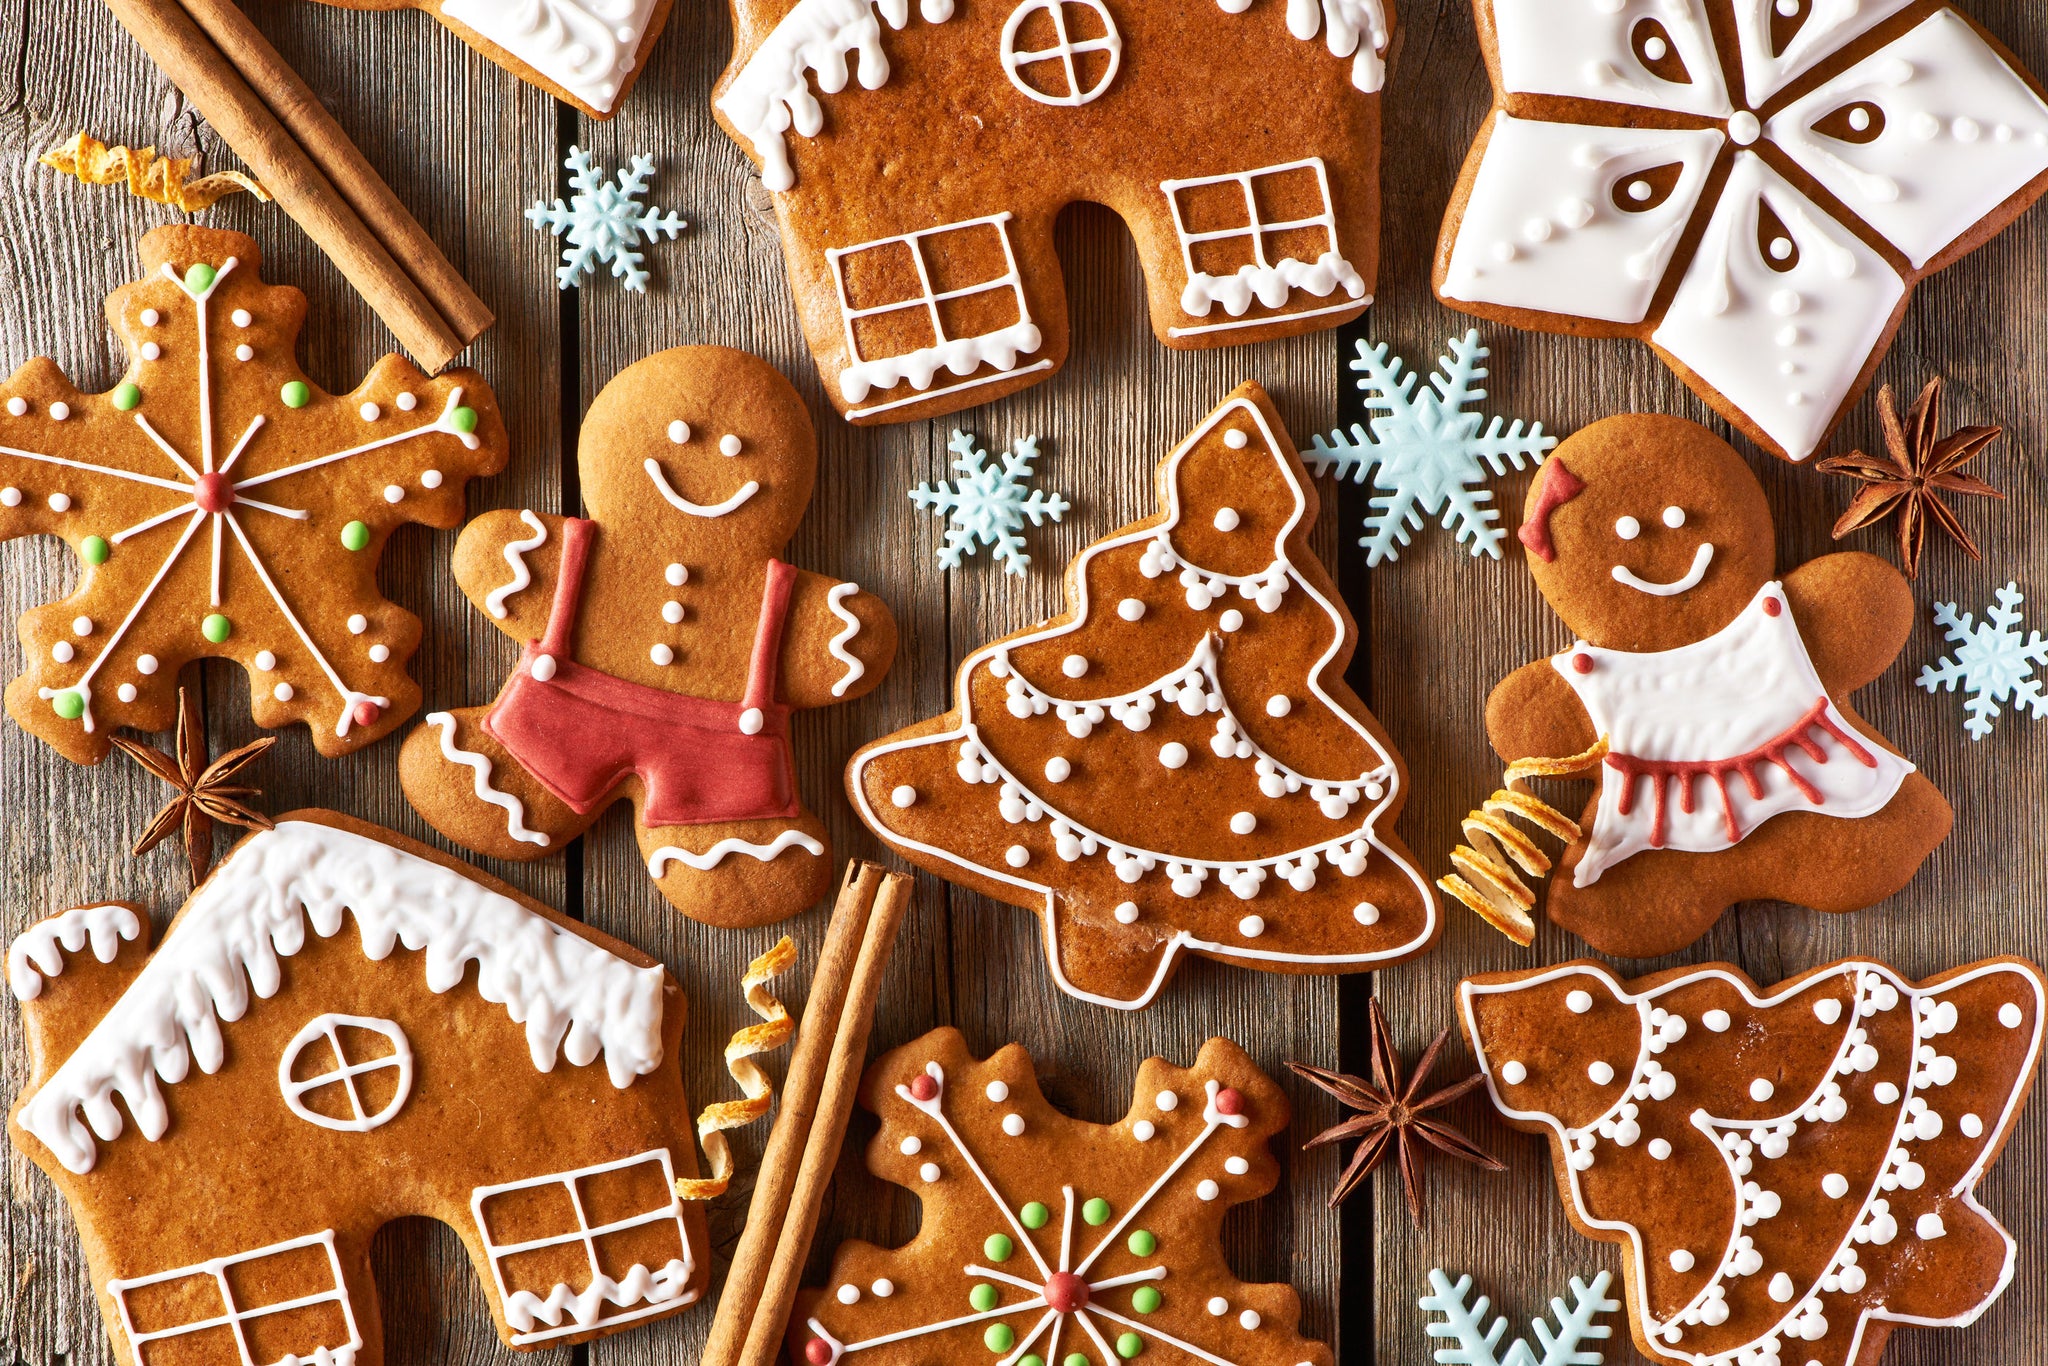 Healthy Plant-Based Gingerbread Cookie Recipe To Try This Holiday Season!